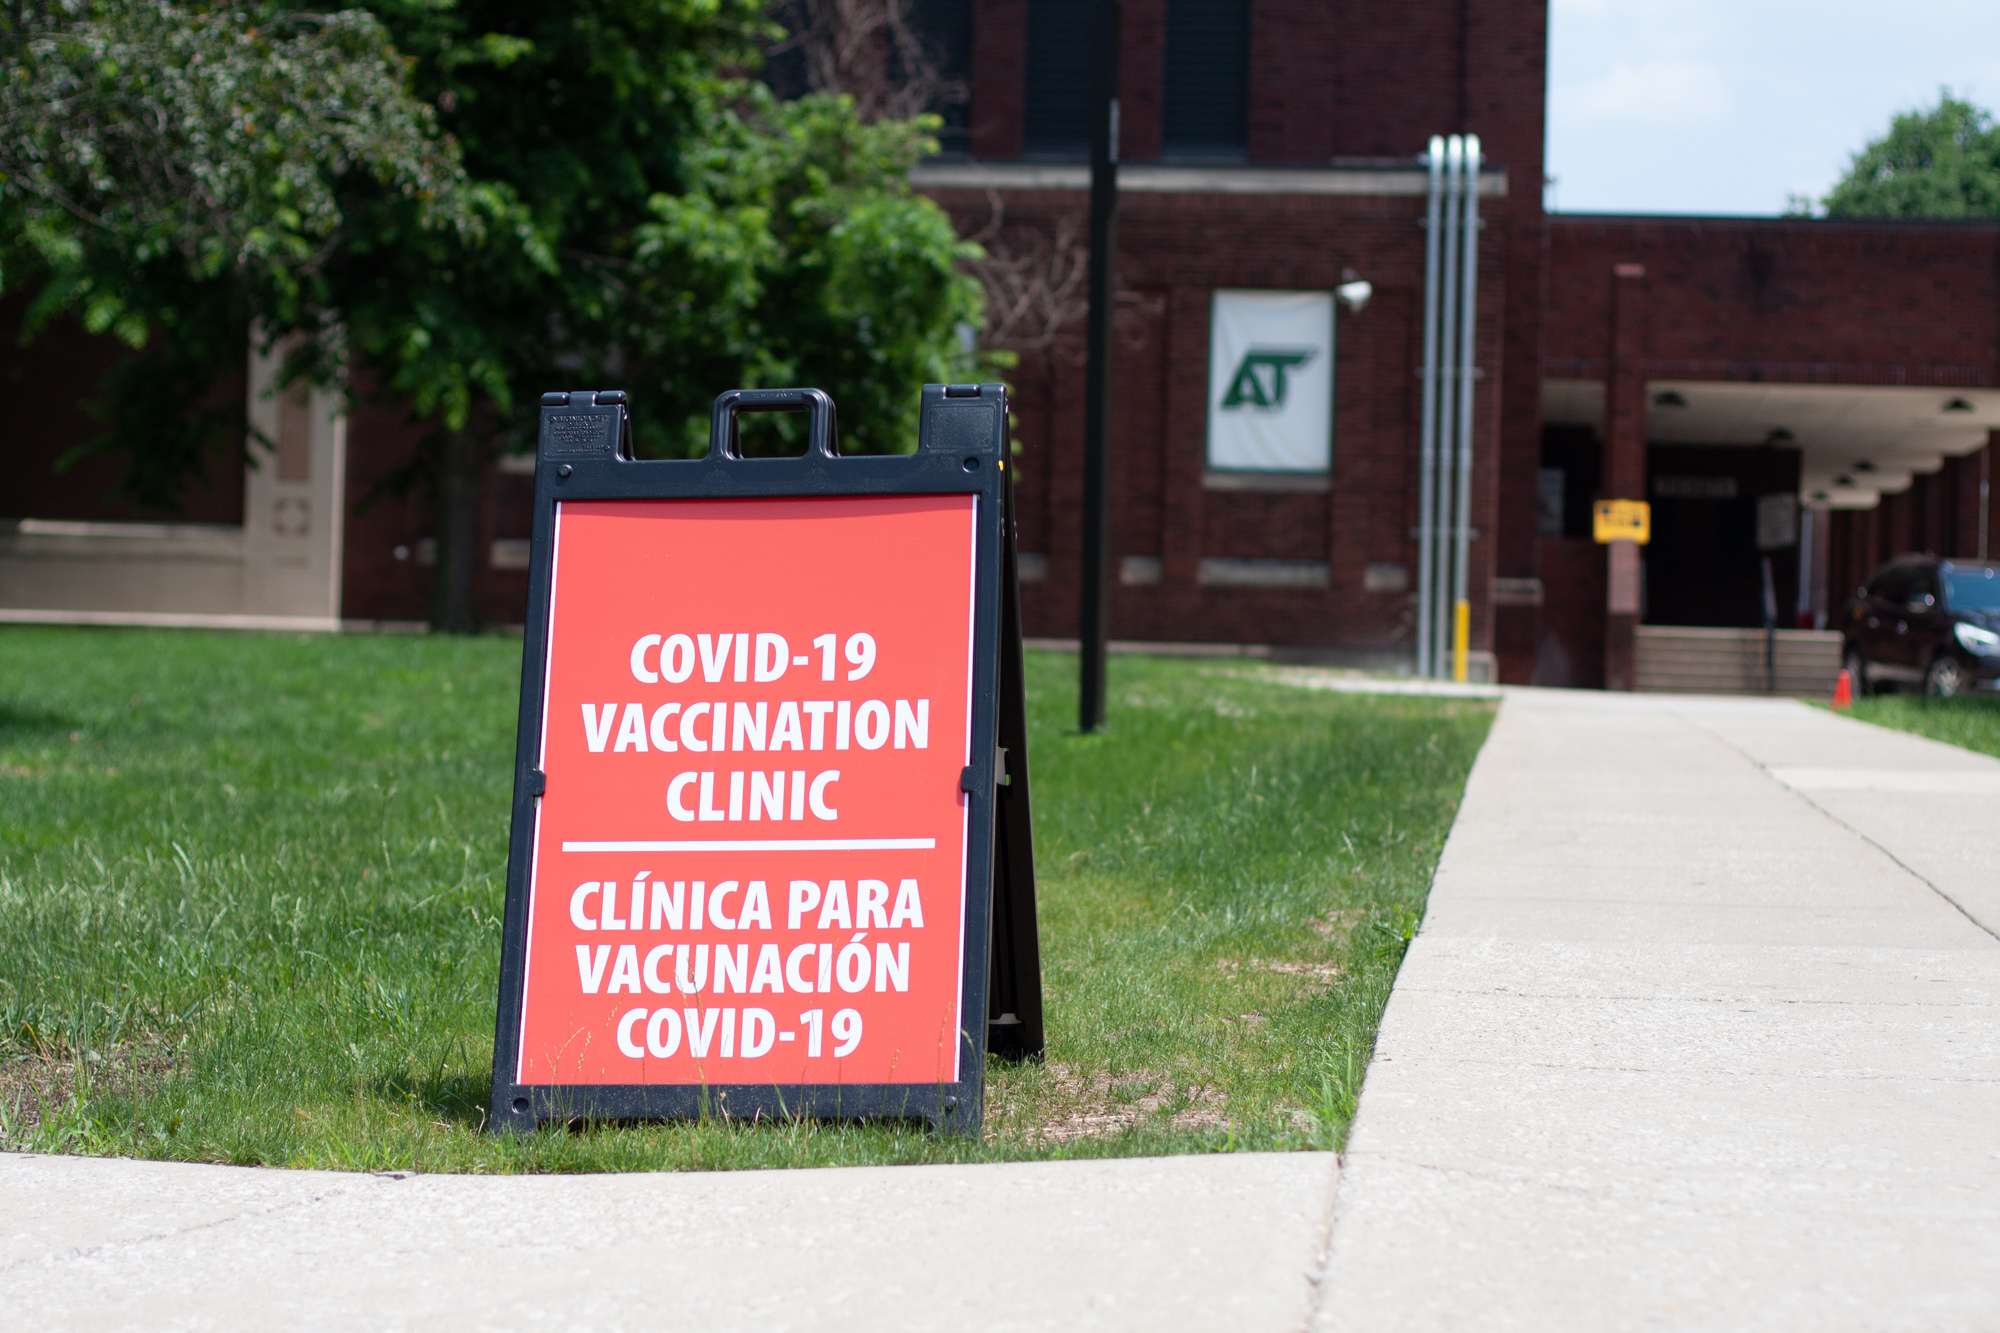 A red clapboard sign sits on a patch of green grass in front of a red brick school building. The sign reads “covid-19 vaccination clinic, clínica para vacunación de covid-19”